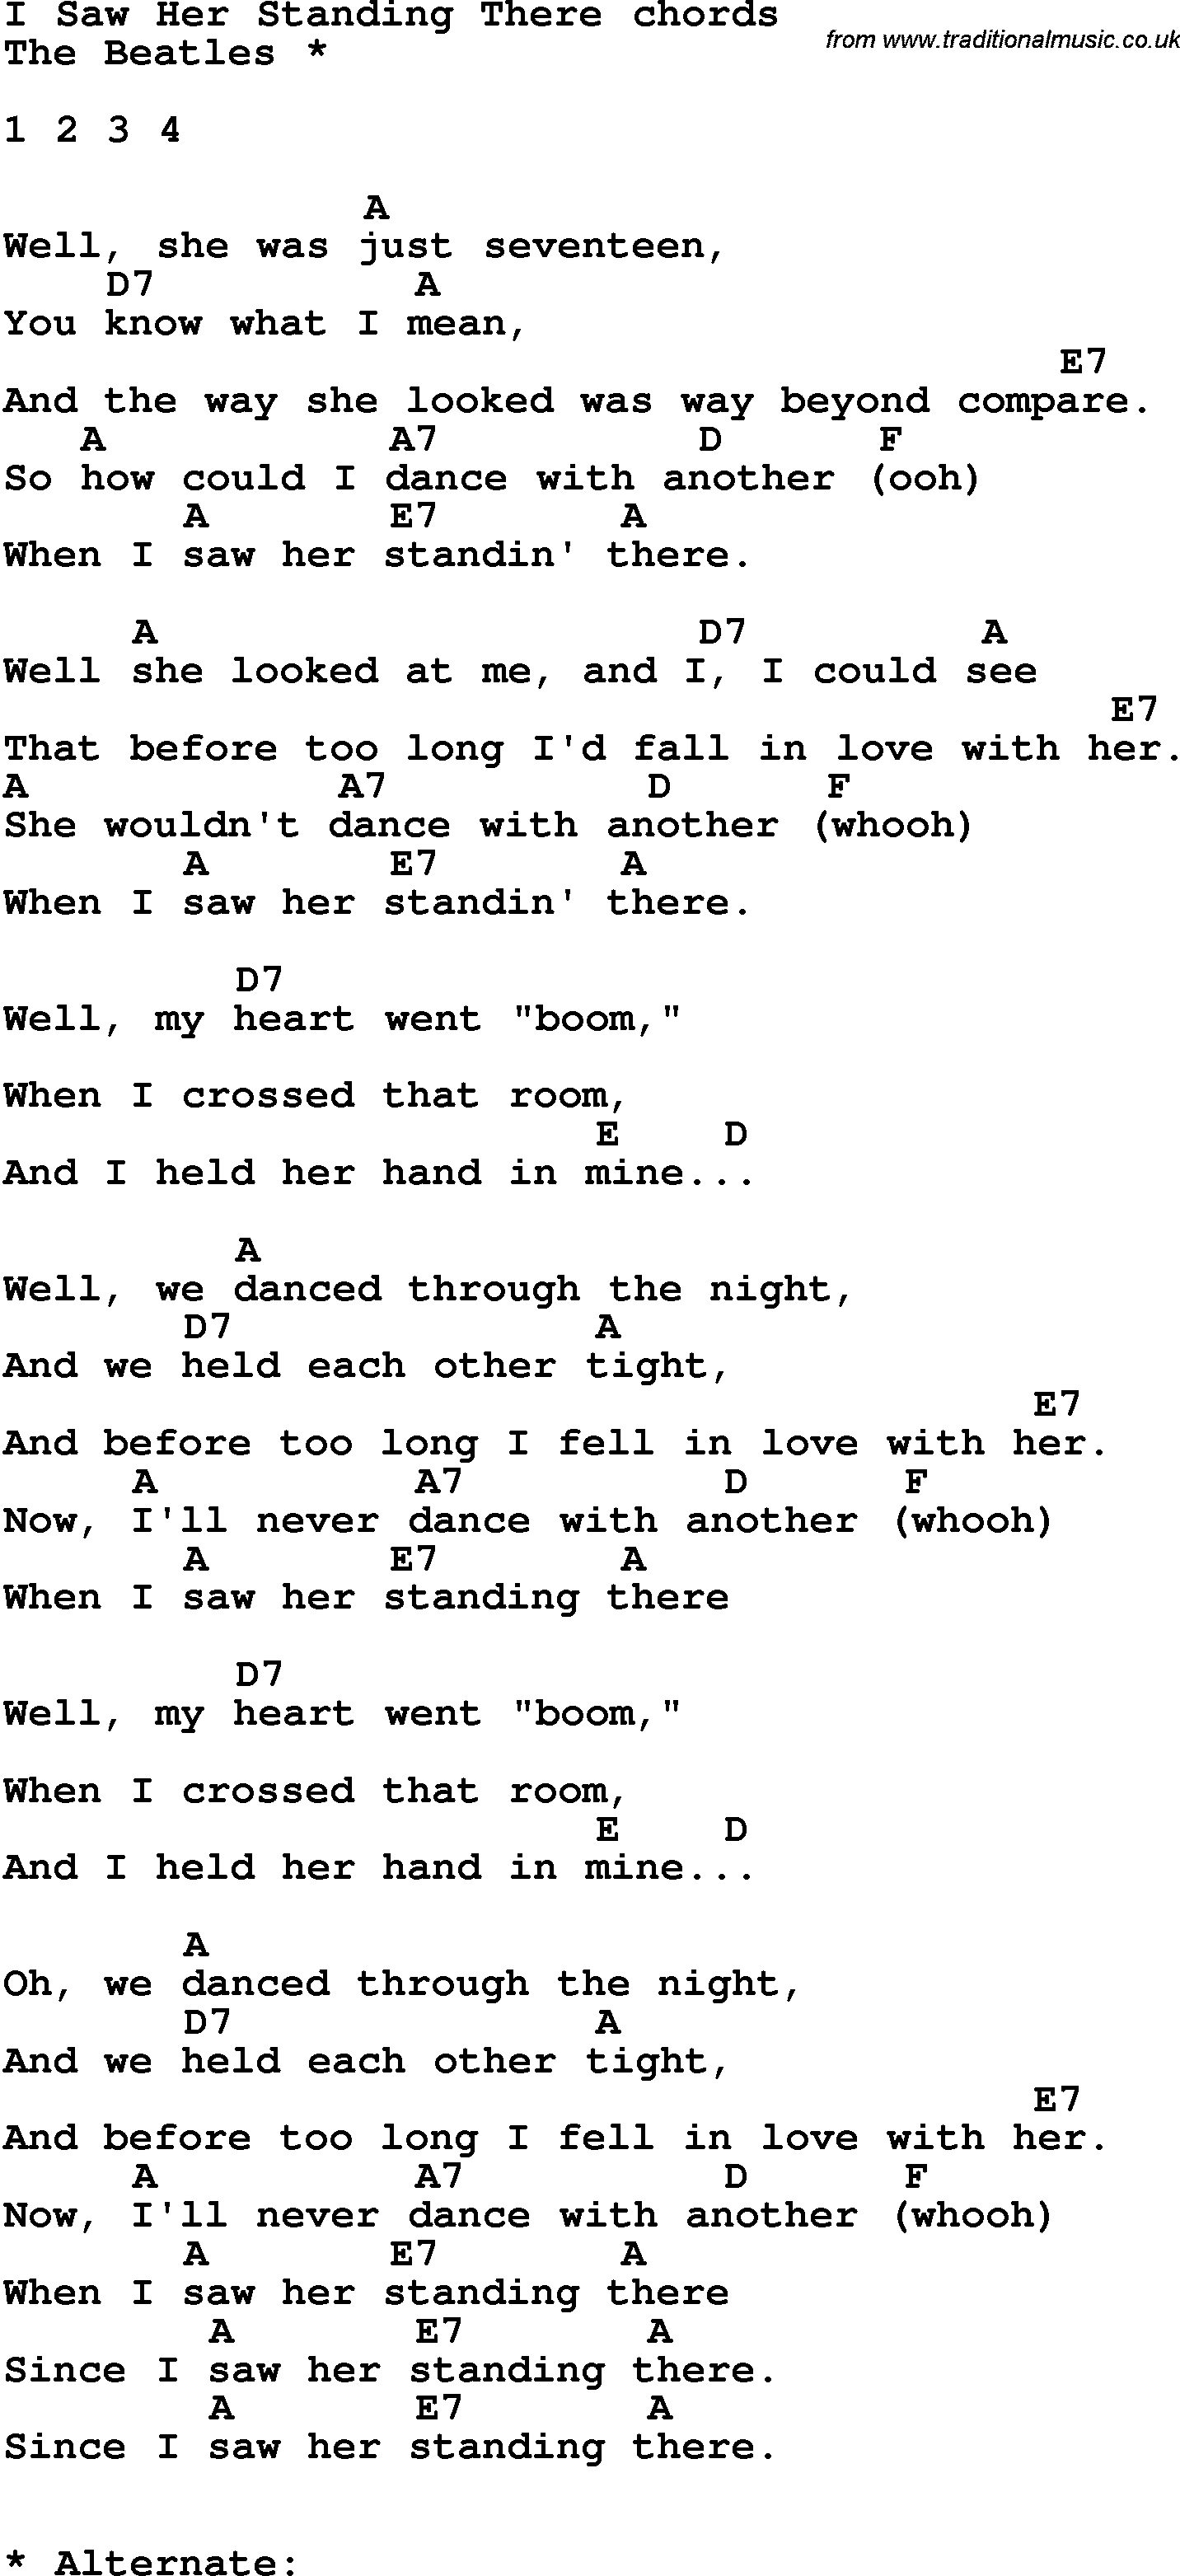 Song Lyrics with guitar chords for I Saw Her Standing There